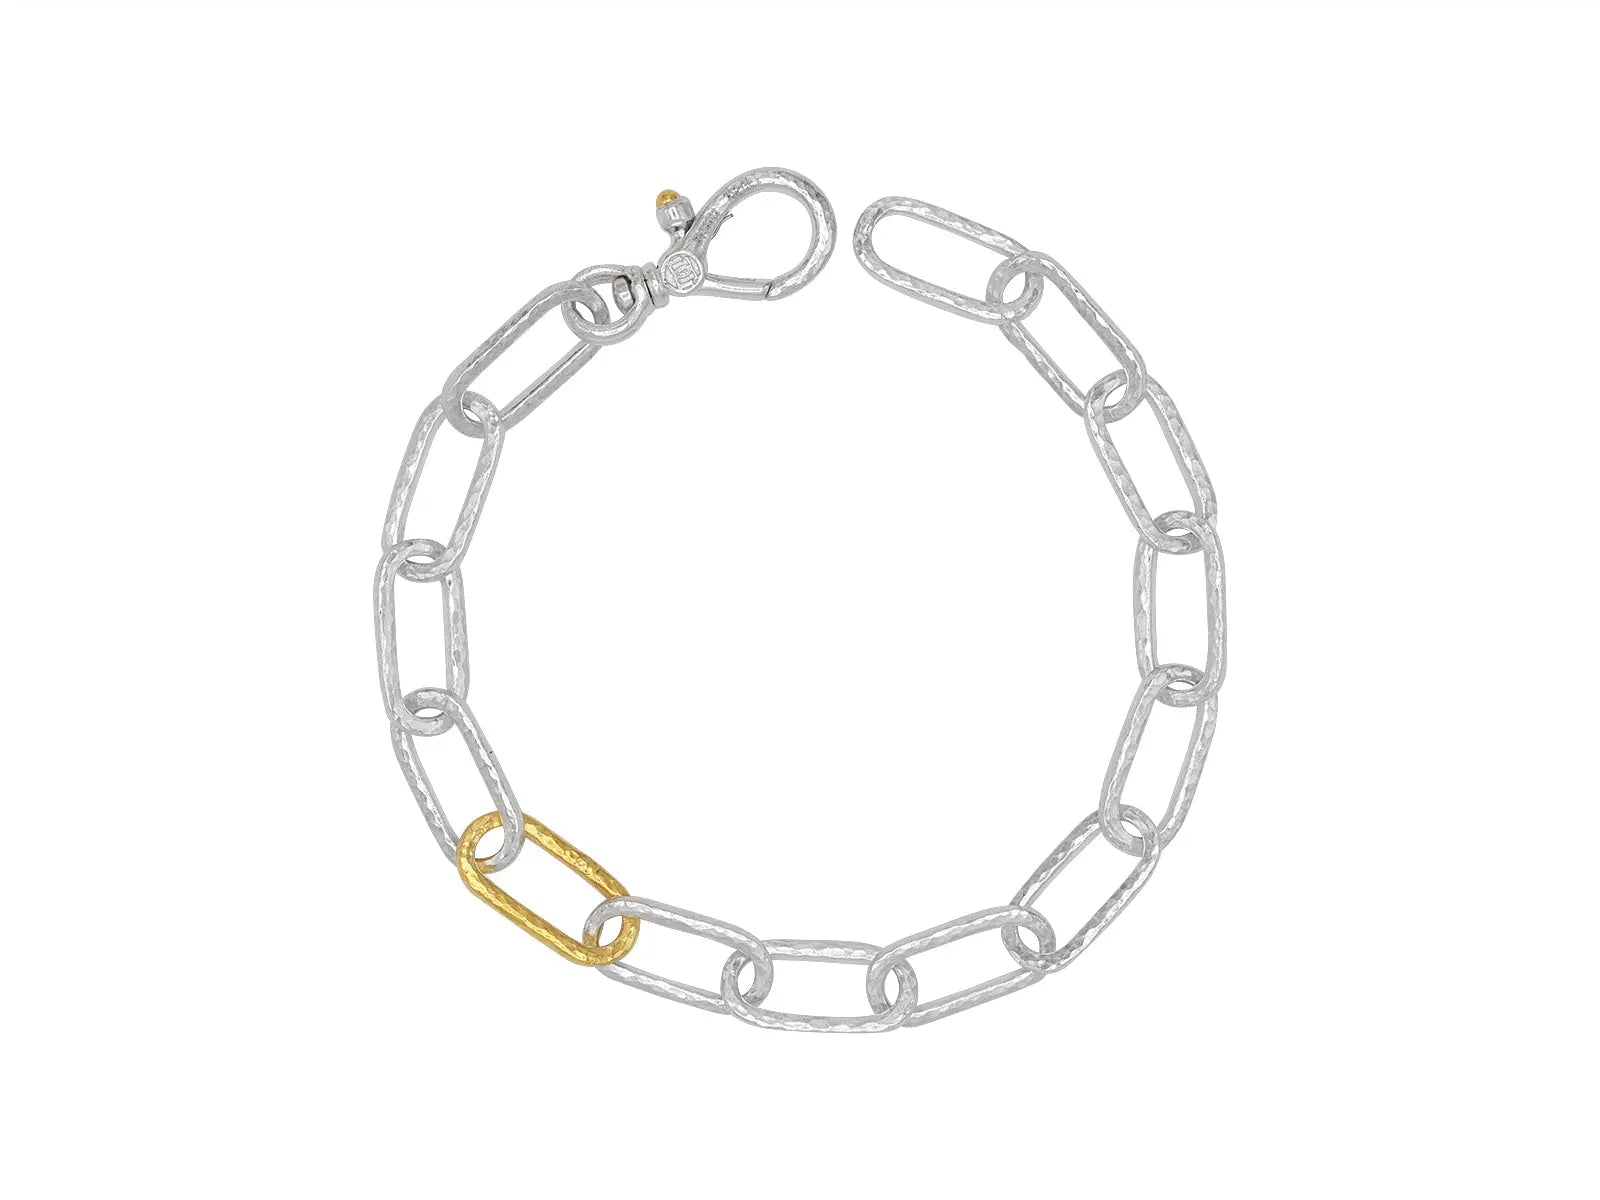 All Around Bracelet in Sterling Silver with 24k Gold Bonded and 7.5mm Oval, from the Hoopla Collection. The length is 7 inches.  Designed by Gurhan